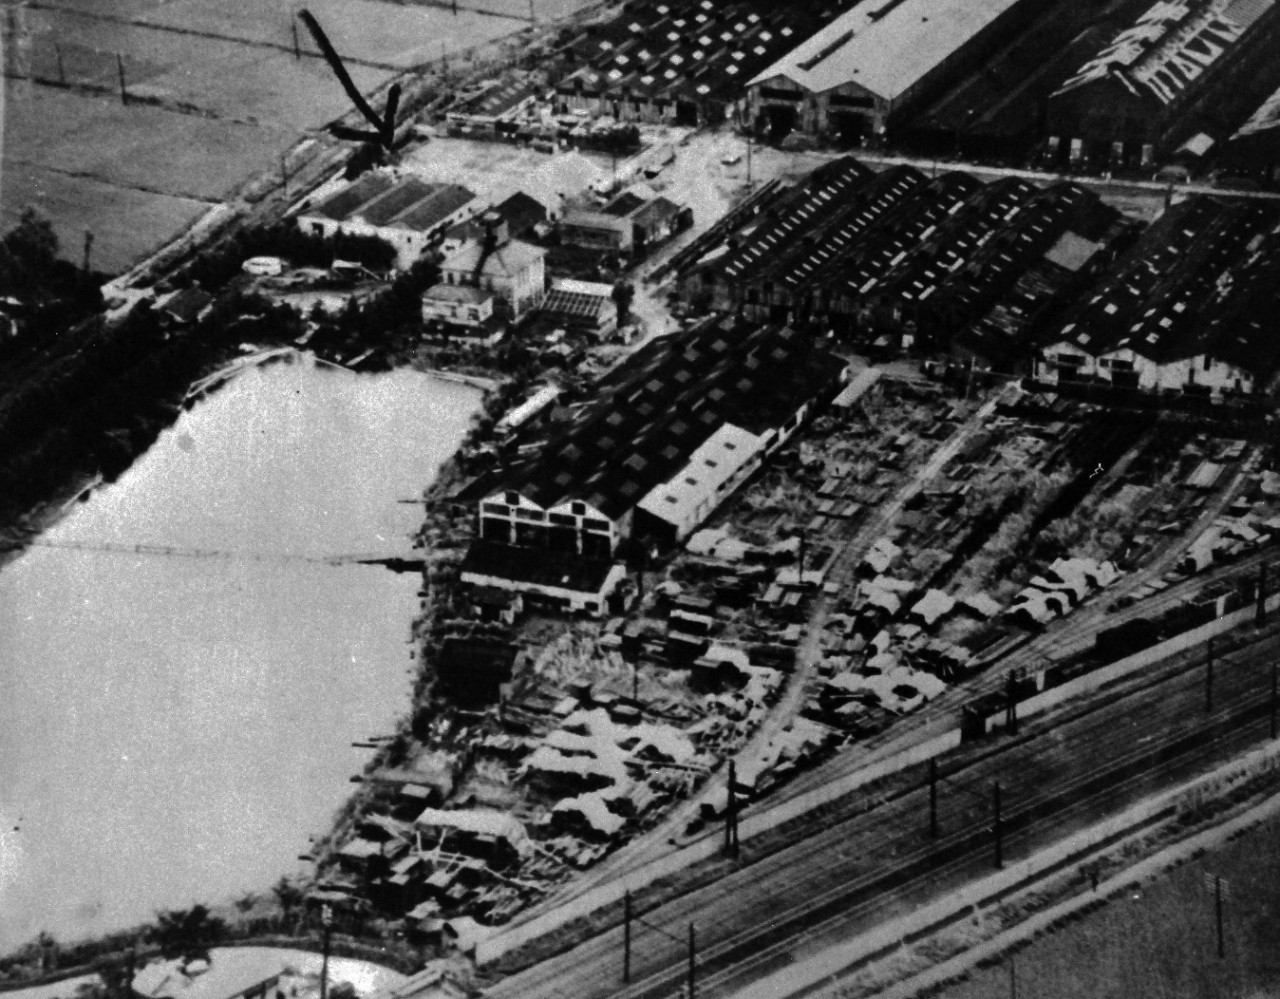 80-G-490389:  Allied Prisoner of War Camp, Tokyo, 1945.  Low aerial of Allied prisoners of war in Tokyo, Japan, area.  Photographed after food was dropped from planes. Note the PW on the rooftops. Released August 29, 1945.   Official U.S. Navy Photograph, now in the collections of the National Archives.   (2015/11/10).